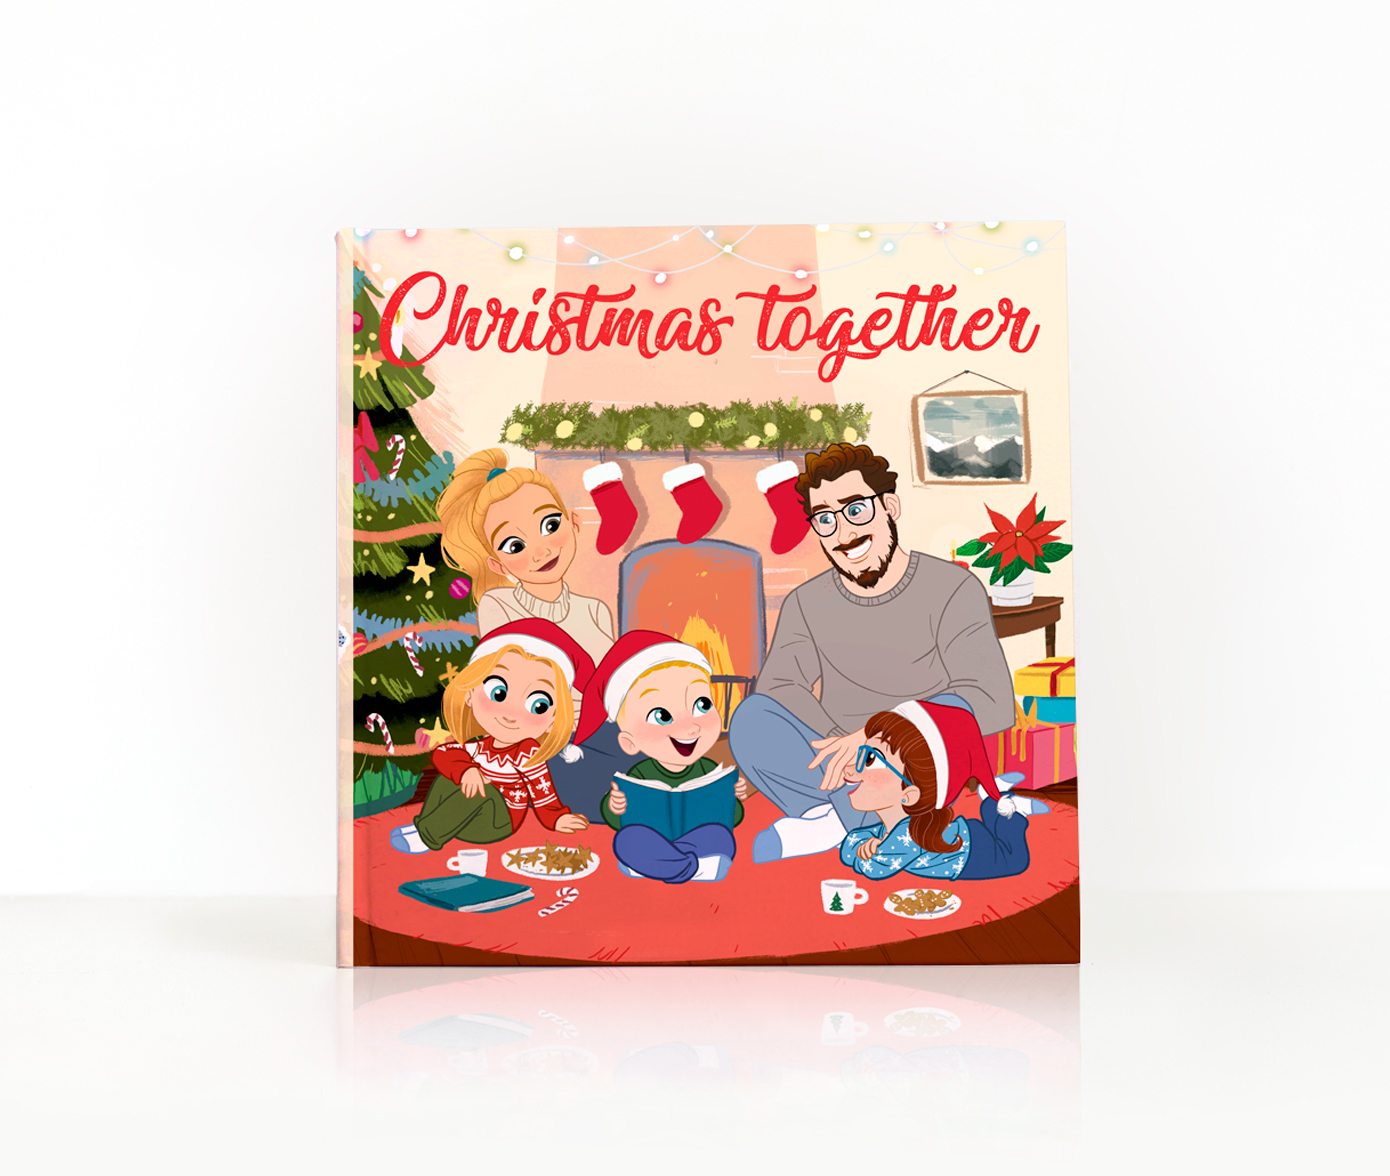 Personalized Christmas book gift Christmas together